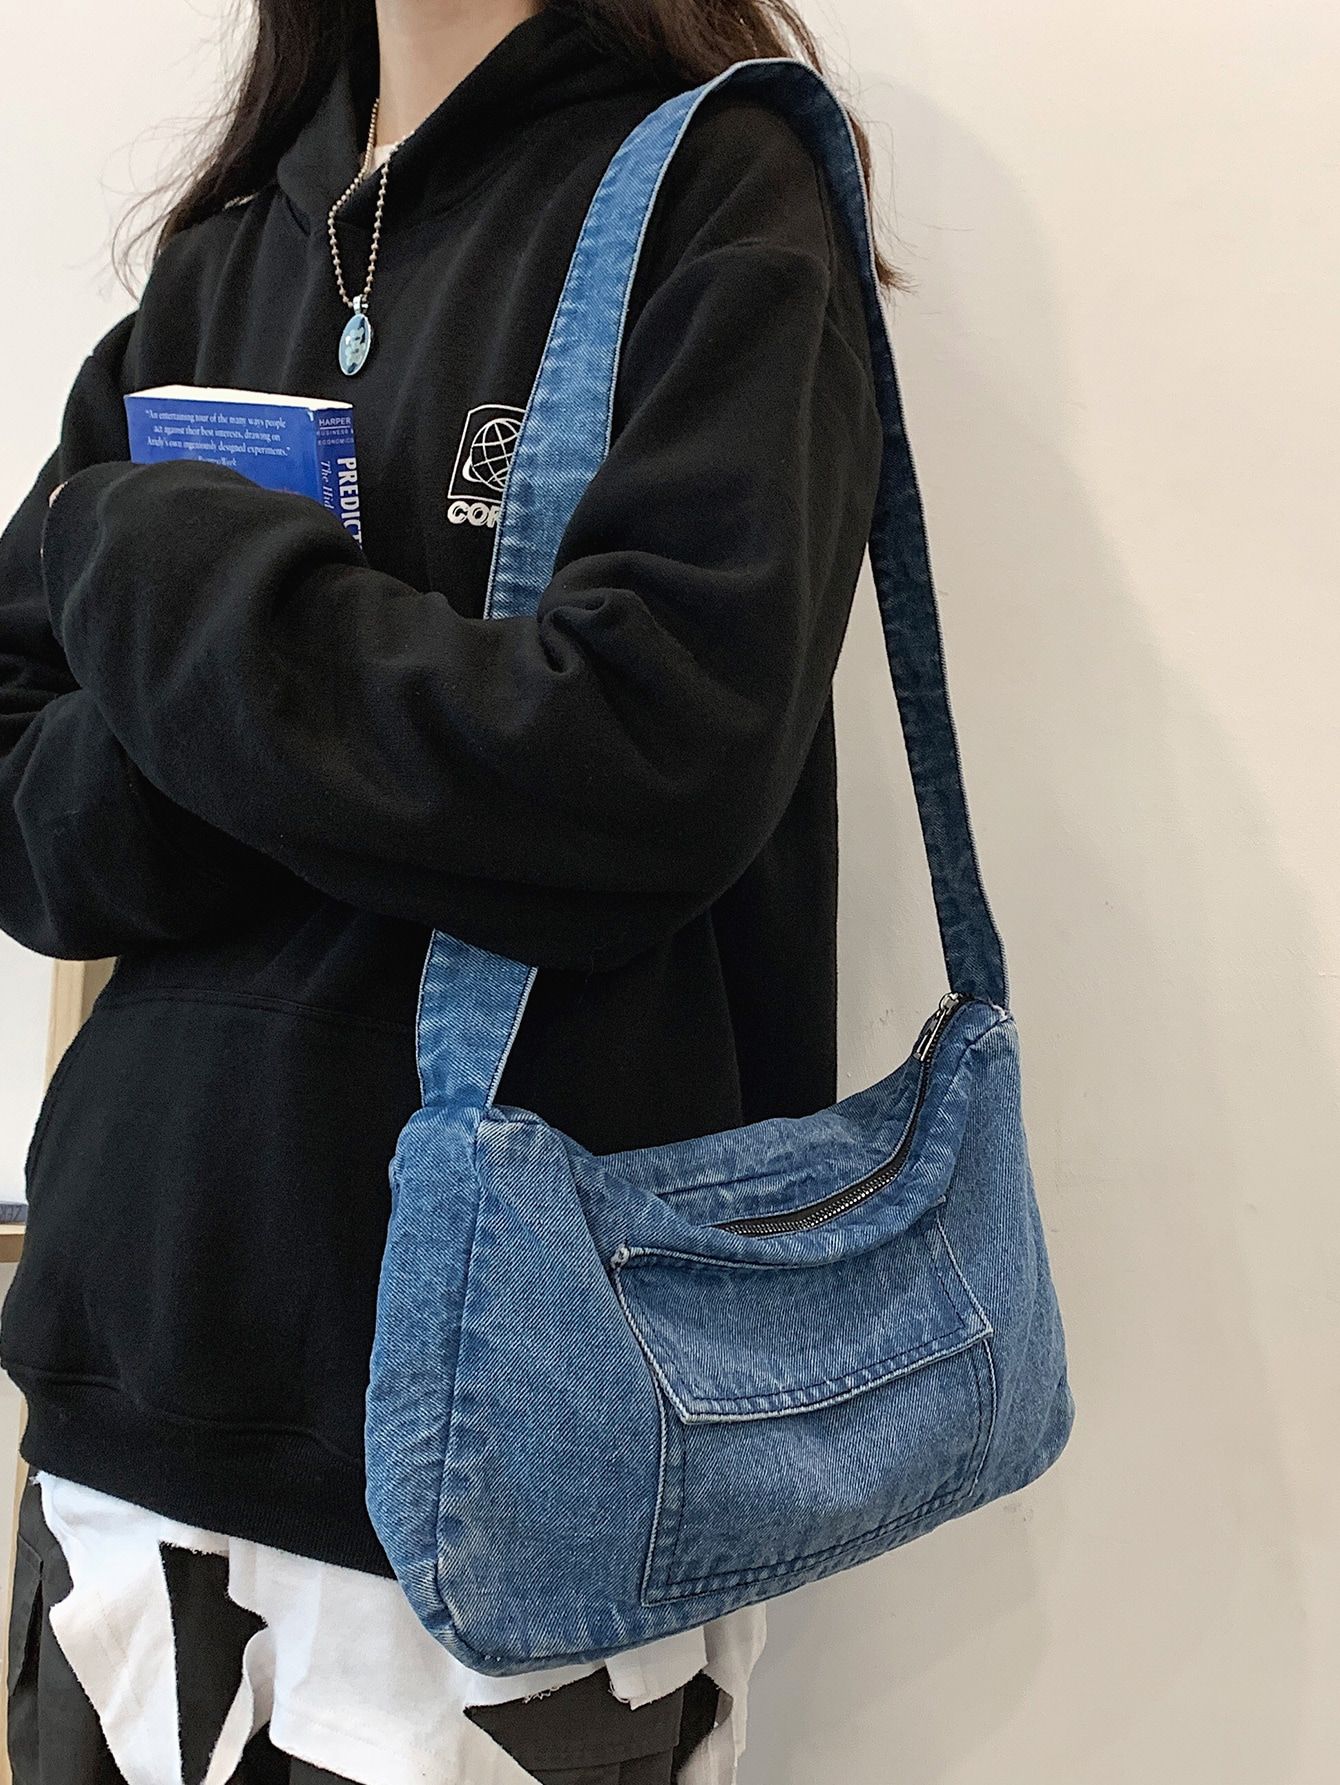 How to Style Denim Bag: The Thing that Can Make You Look Super Youthful